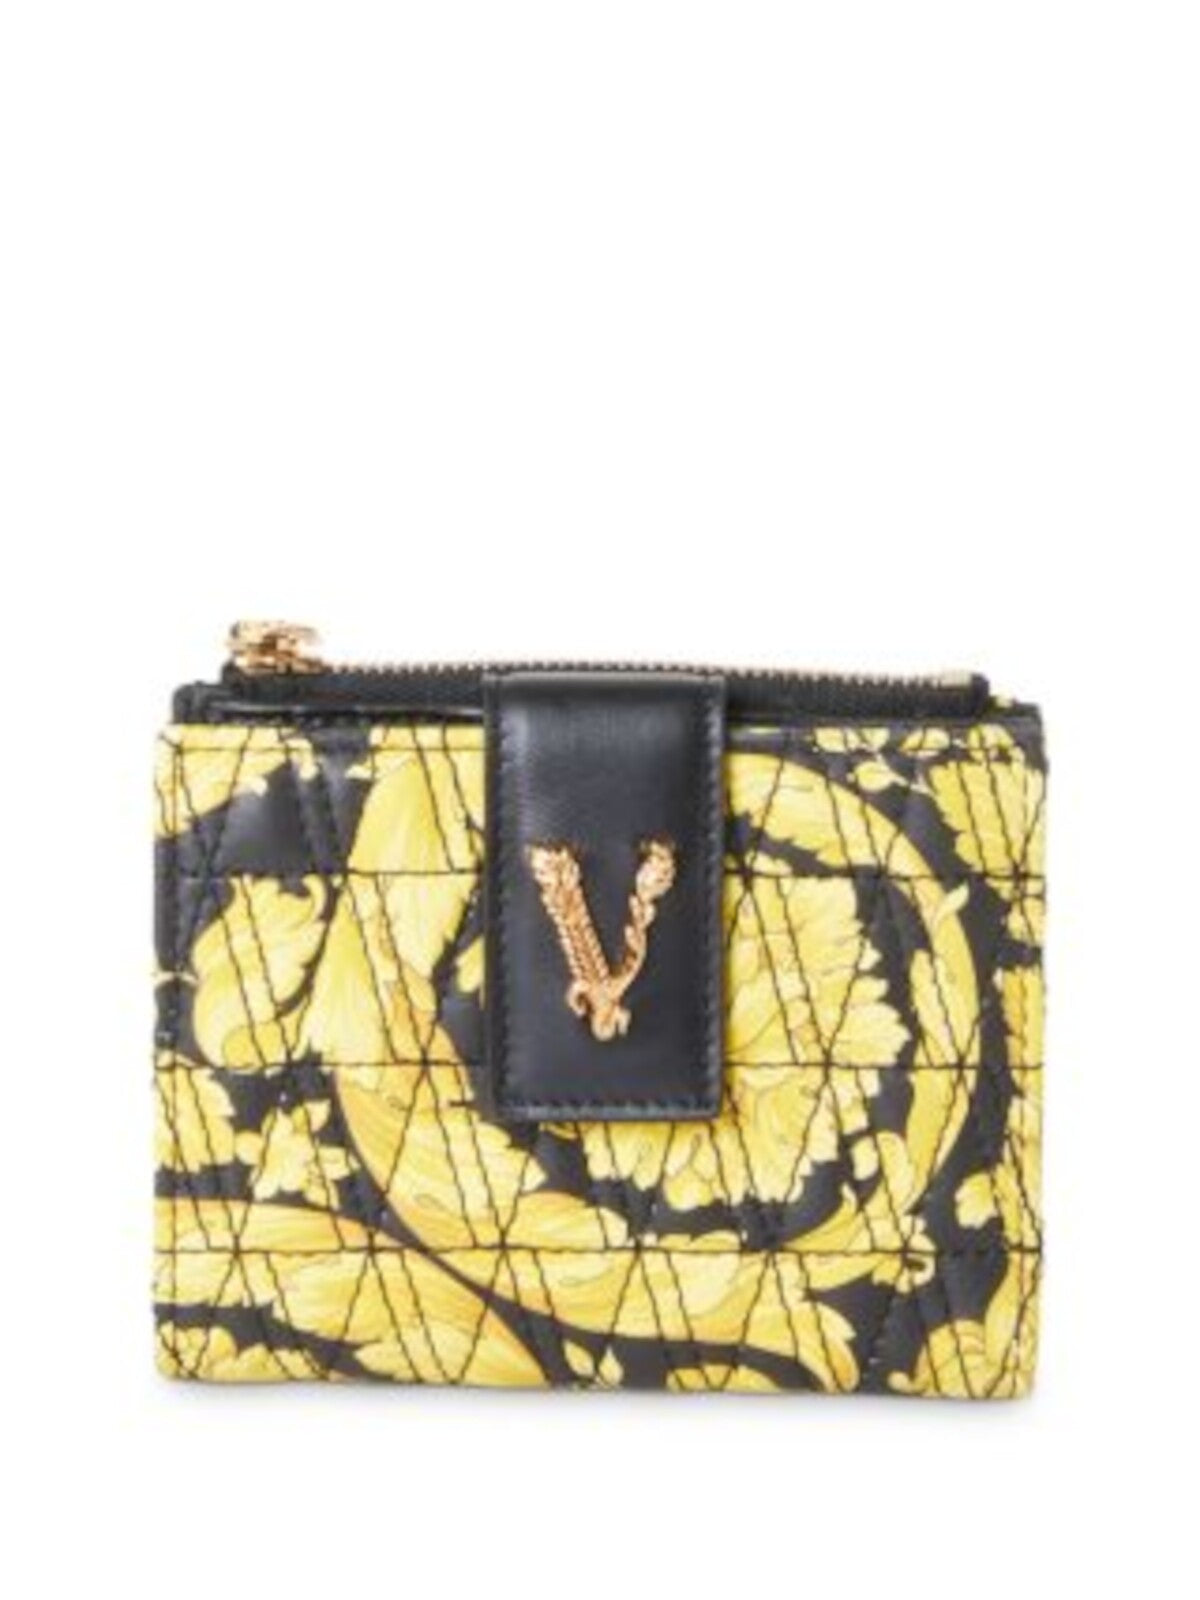 VERSACE Women's Black Floral Leather Strapless Wallet